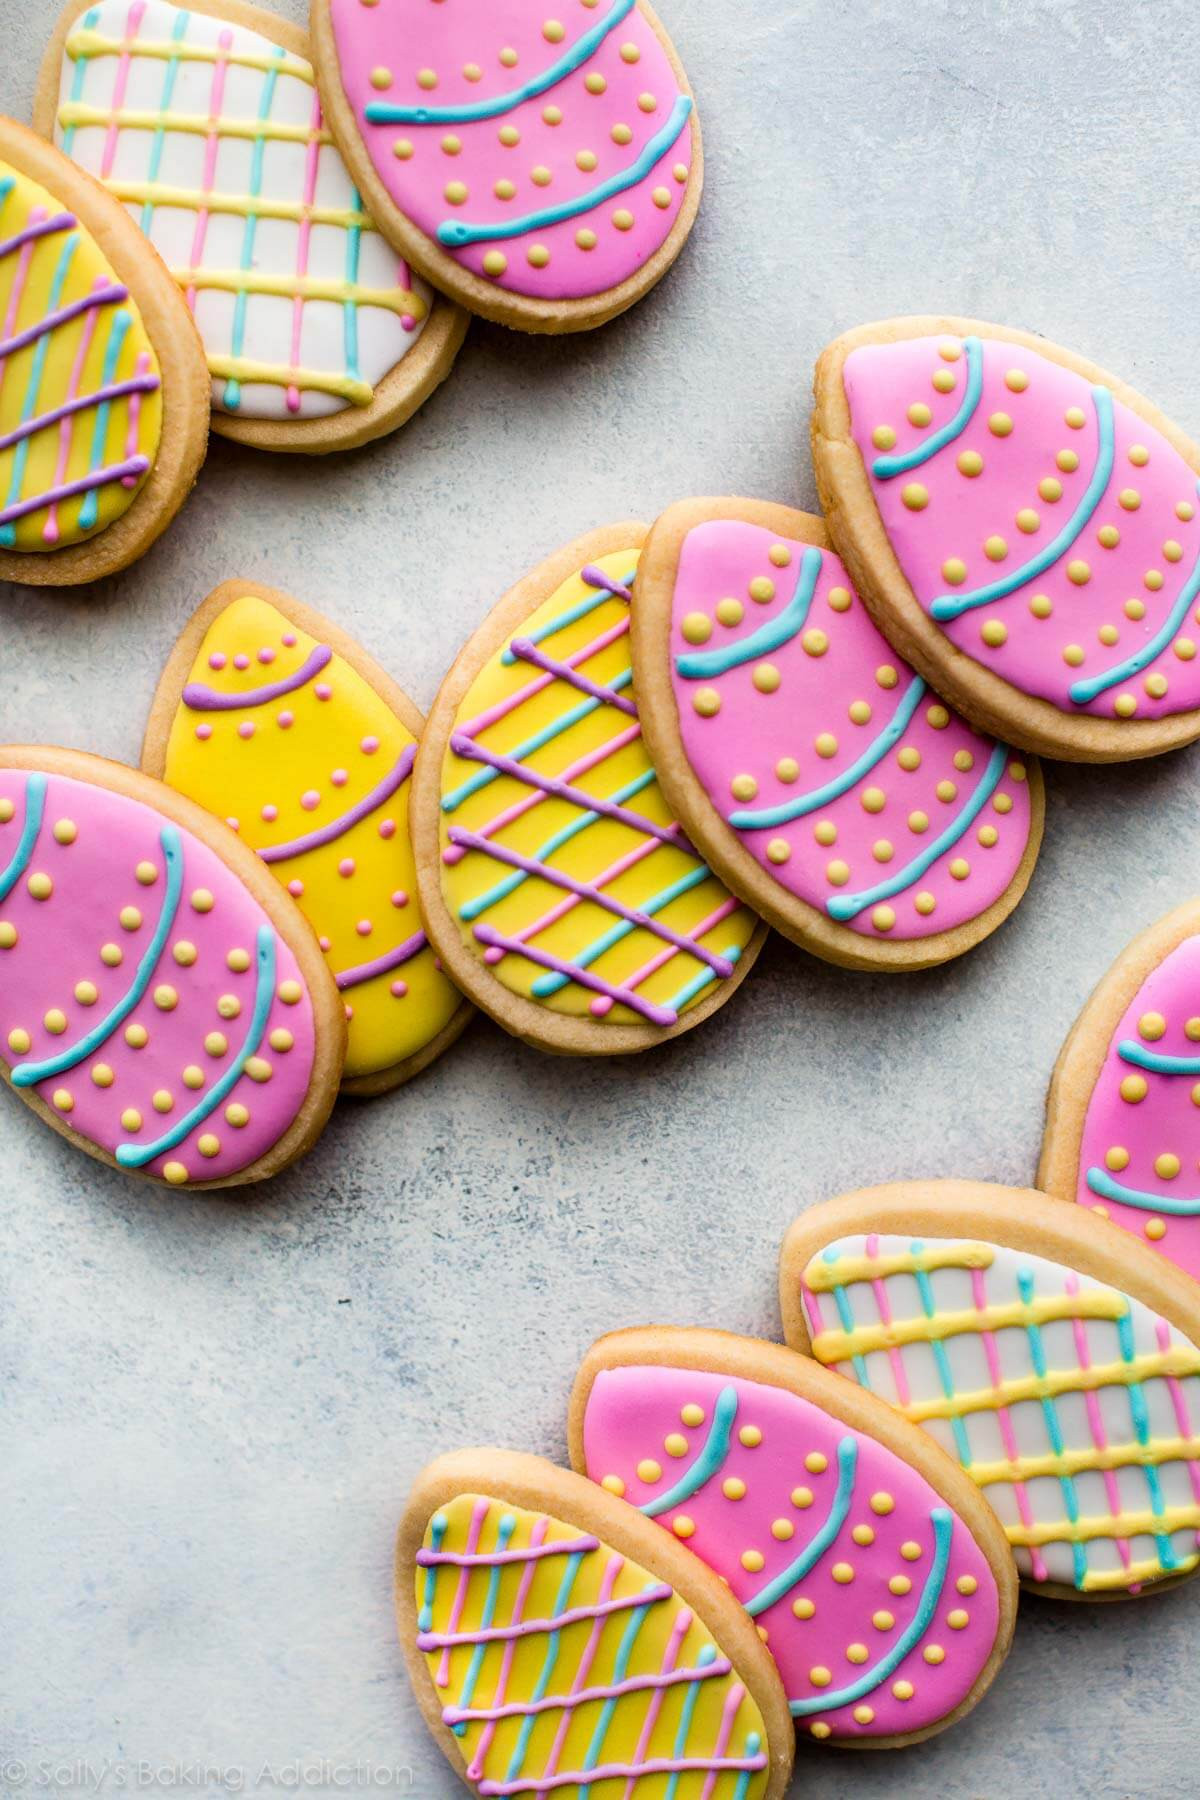 Top 15 Easter Egg Sugar Cookies – Easy Recipes To Make at Home